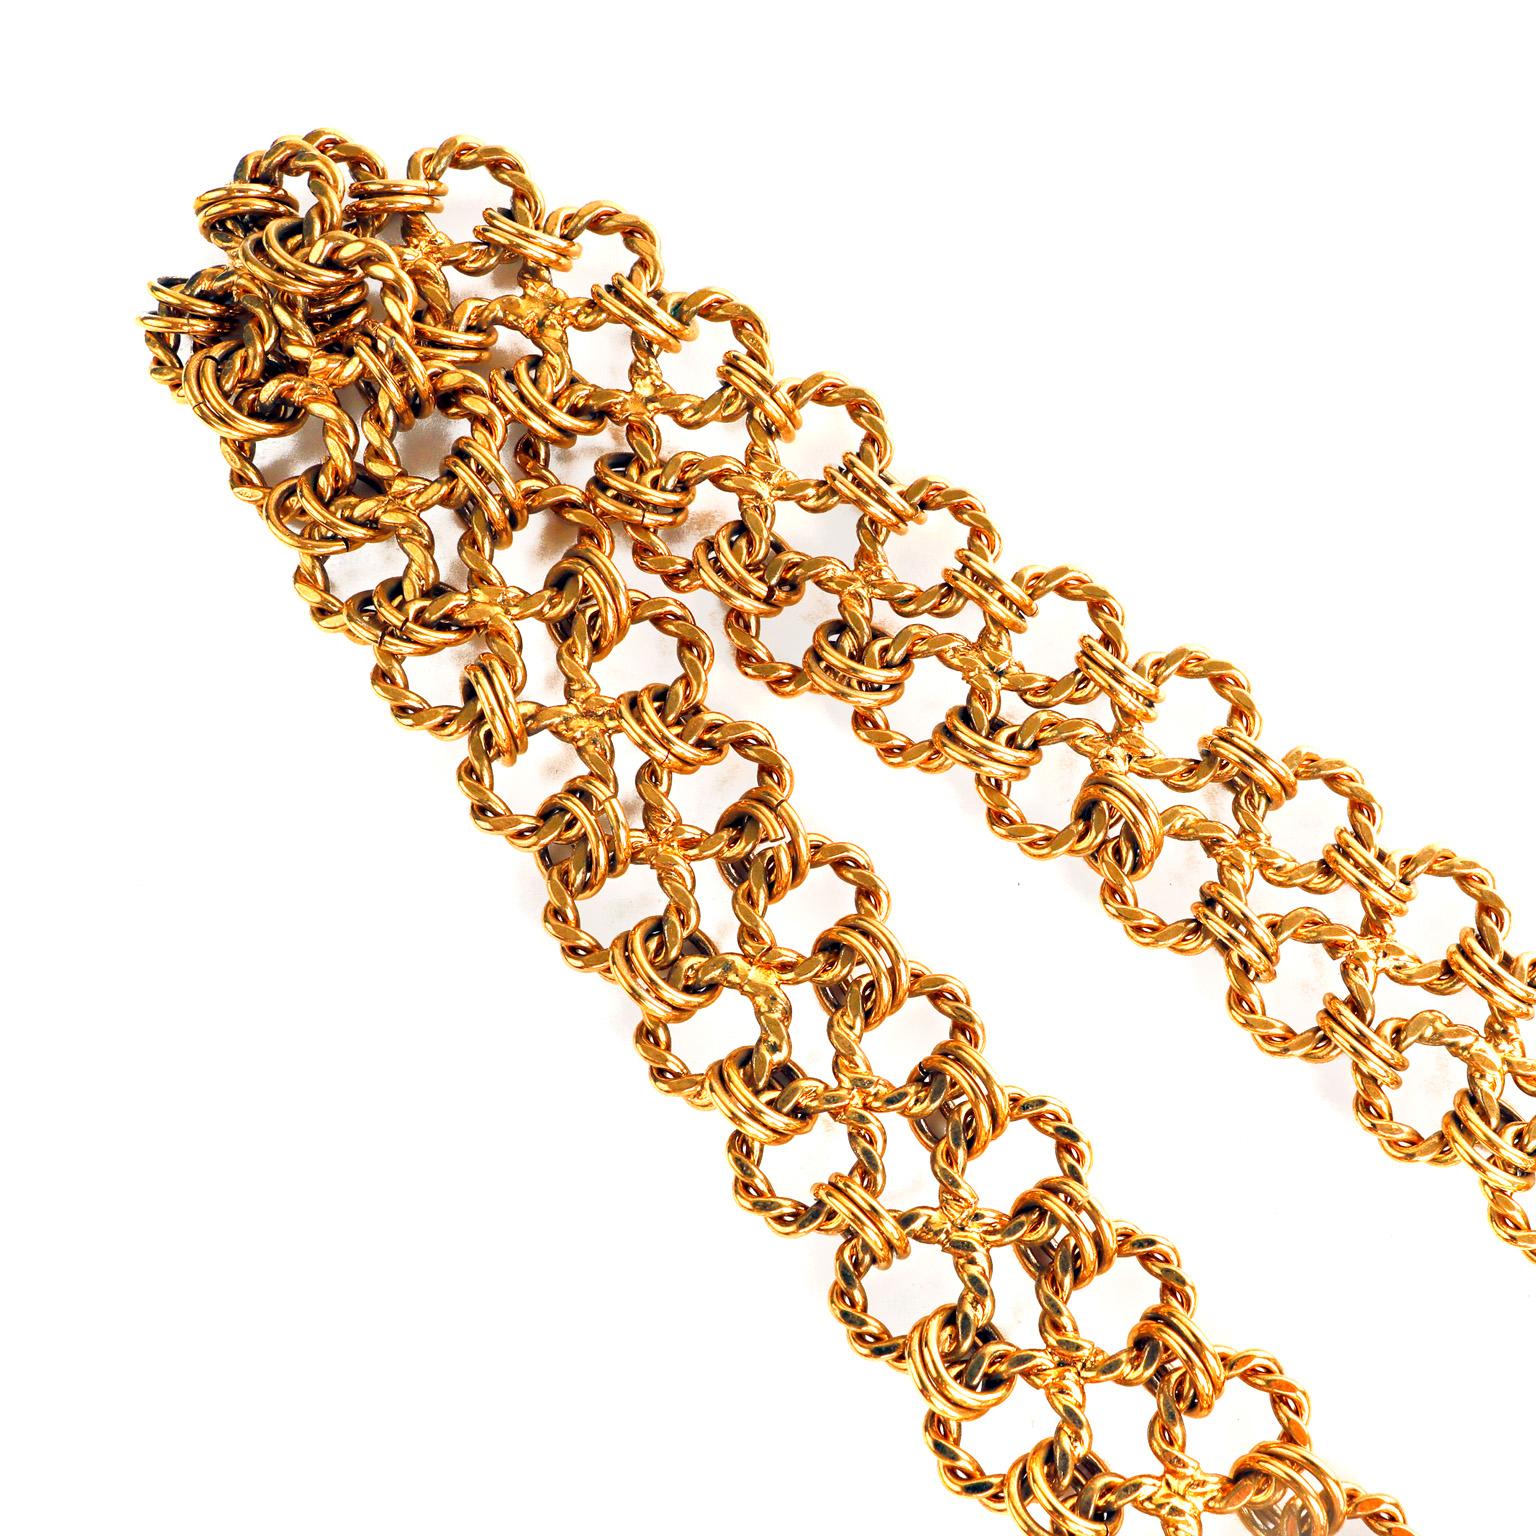 Chanel Vintage Gold Chain Belt with Black Leather Buckle In Good Condition For Sale In Palm Beach, FL